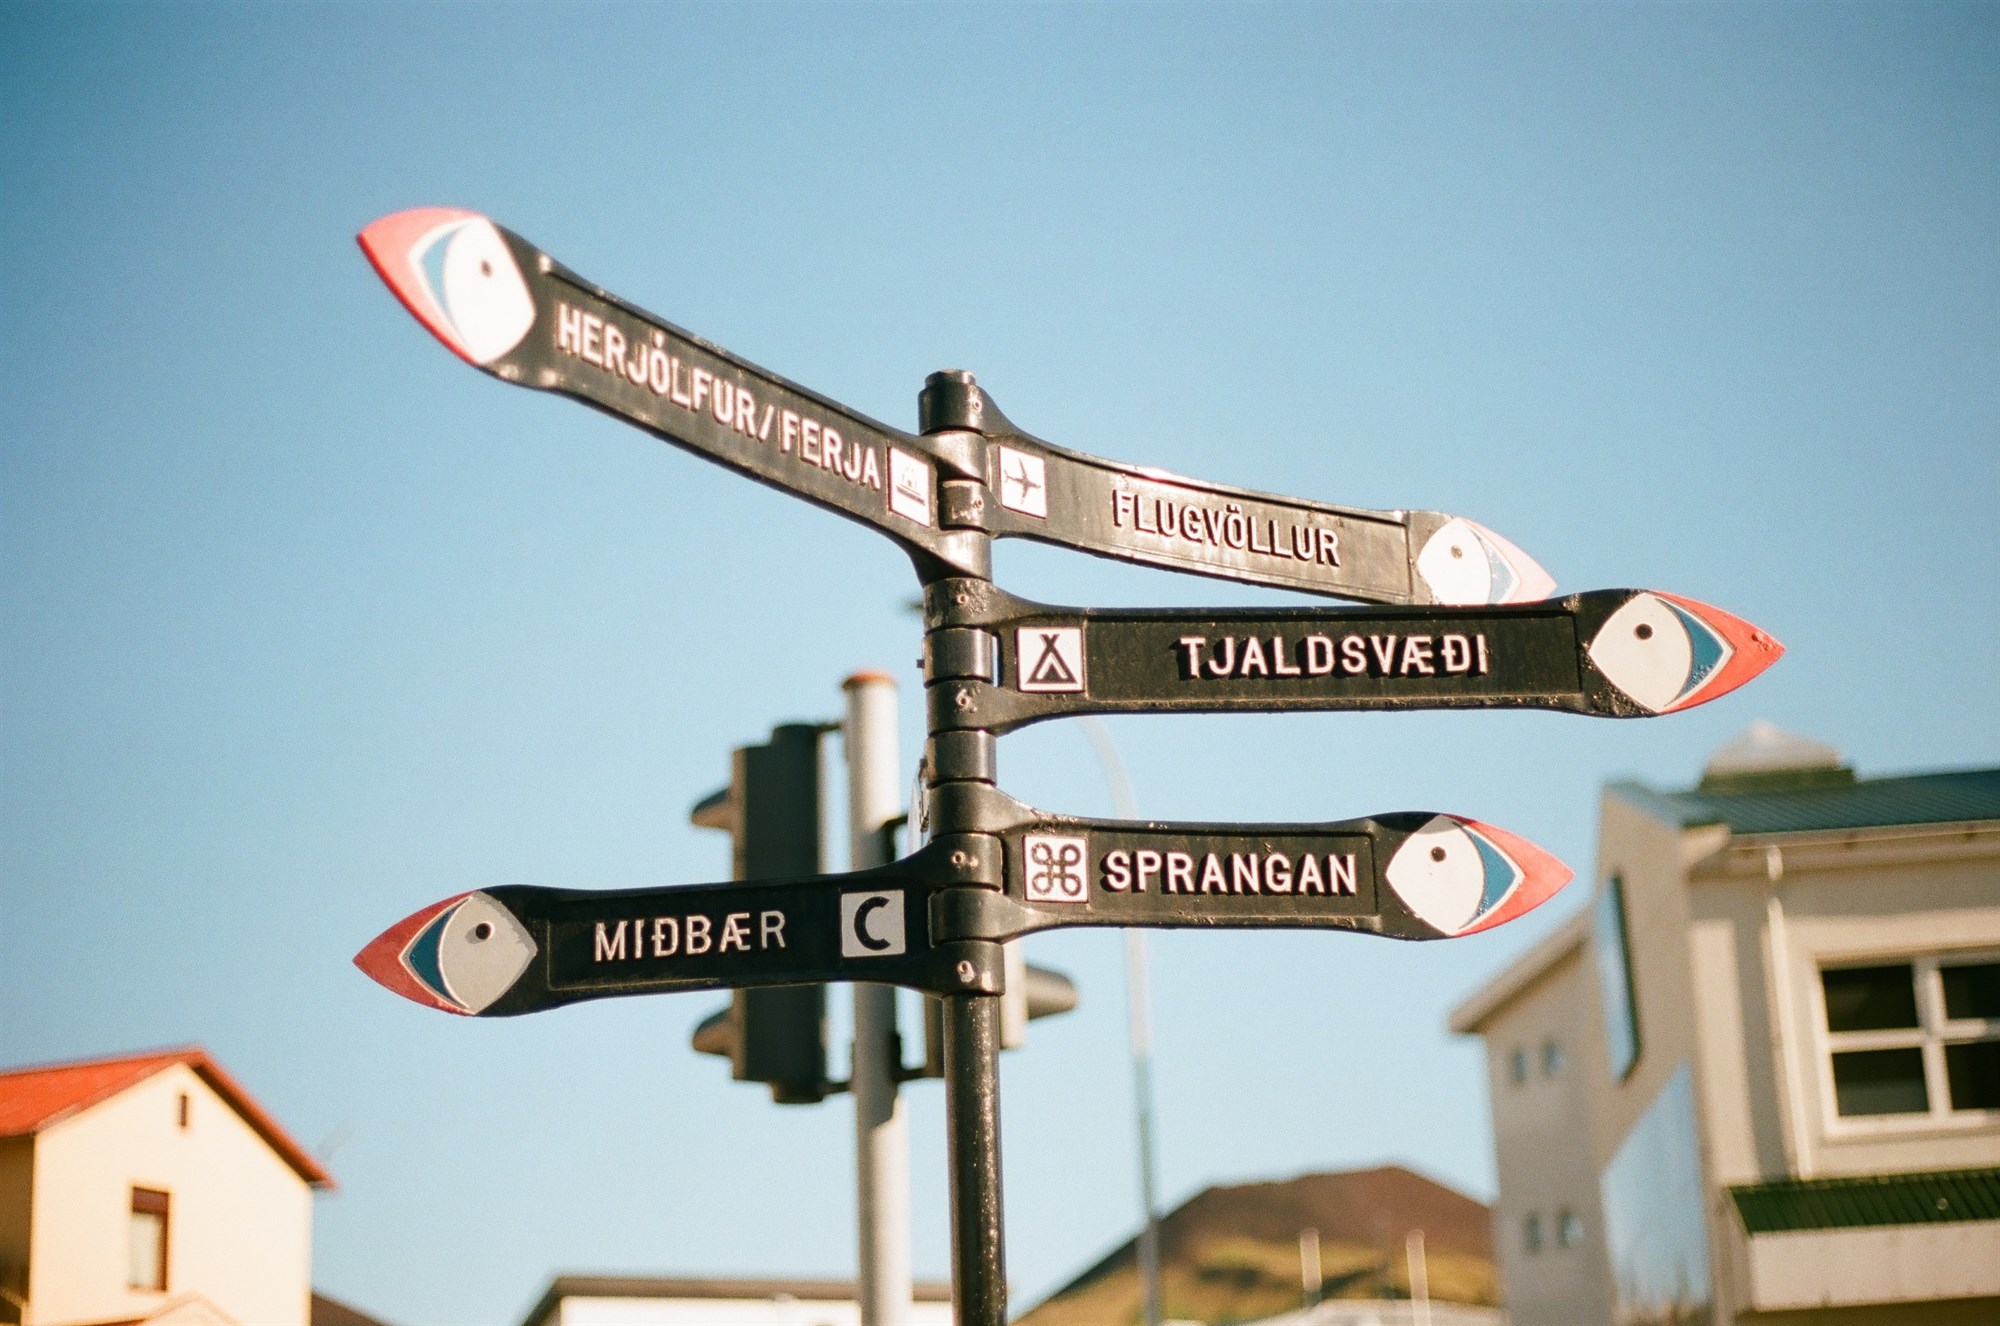 Icelandic names on a signpost.